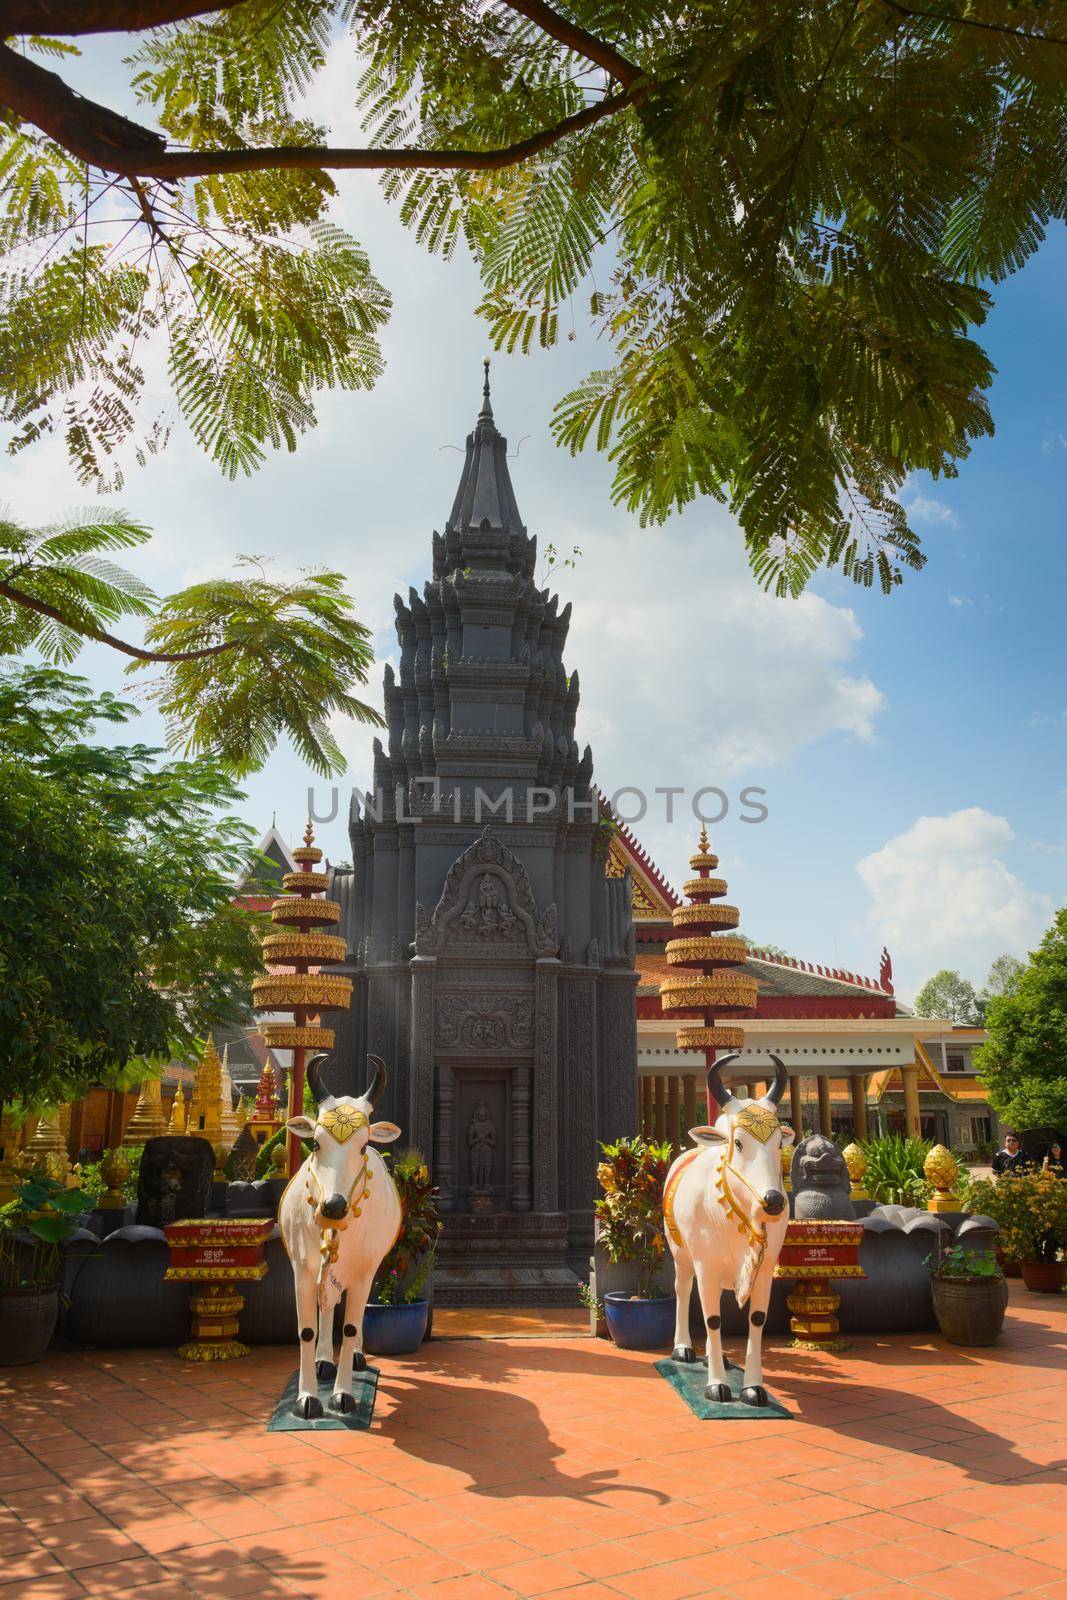 2019-11-16 / Siem Reap, Cambodia - Black stupa in Wat Preah Prom Rath, a buddhist temple complex built in the 13th century. by hernan_hyper